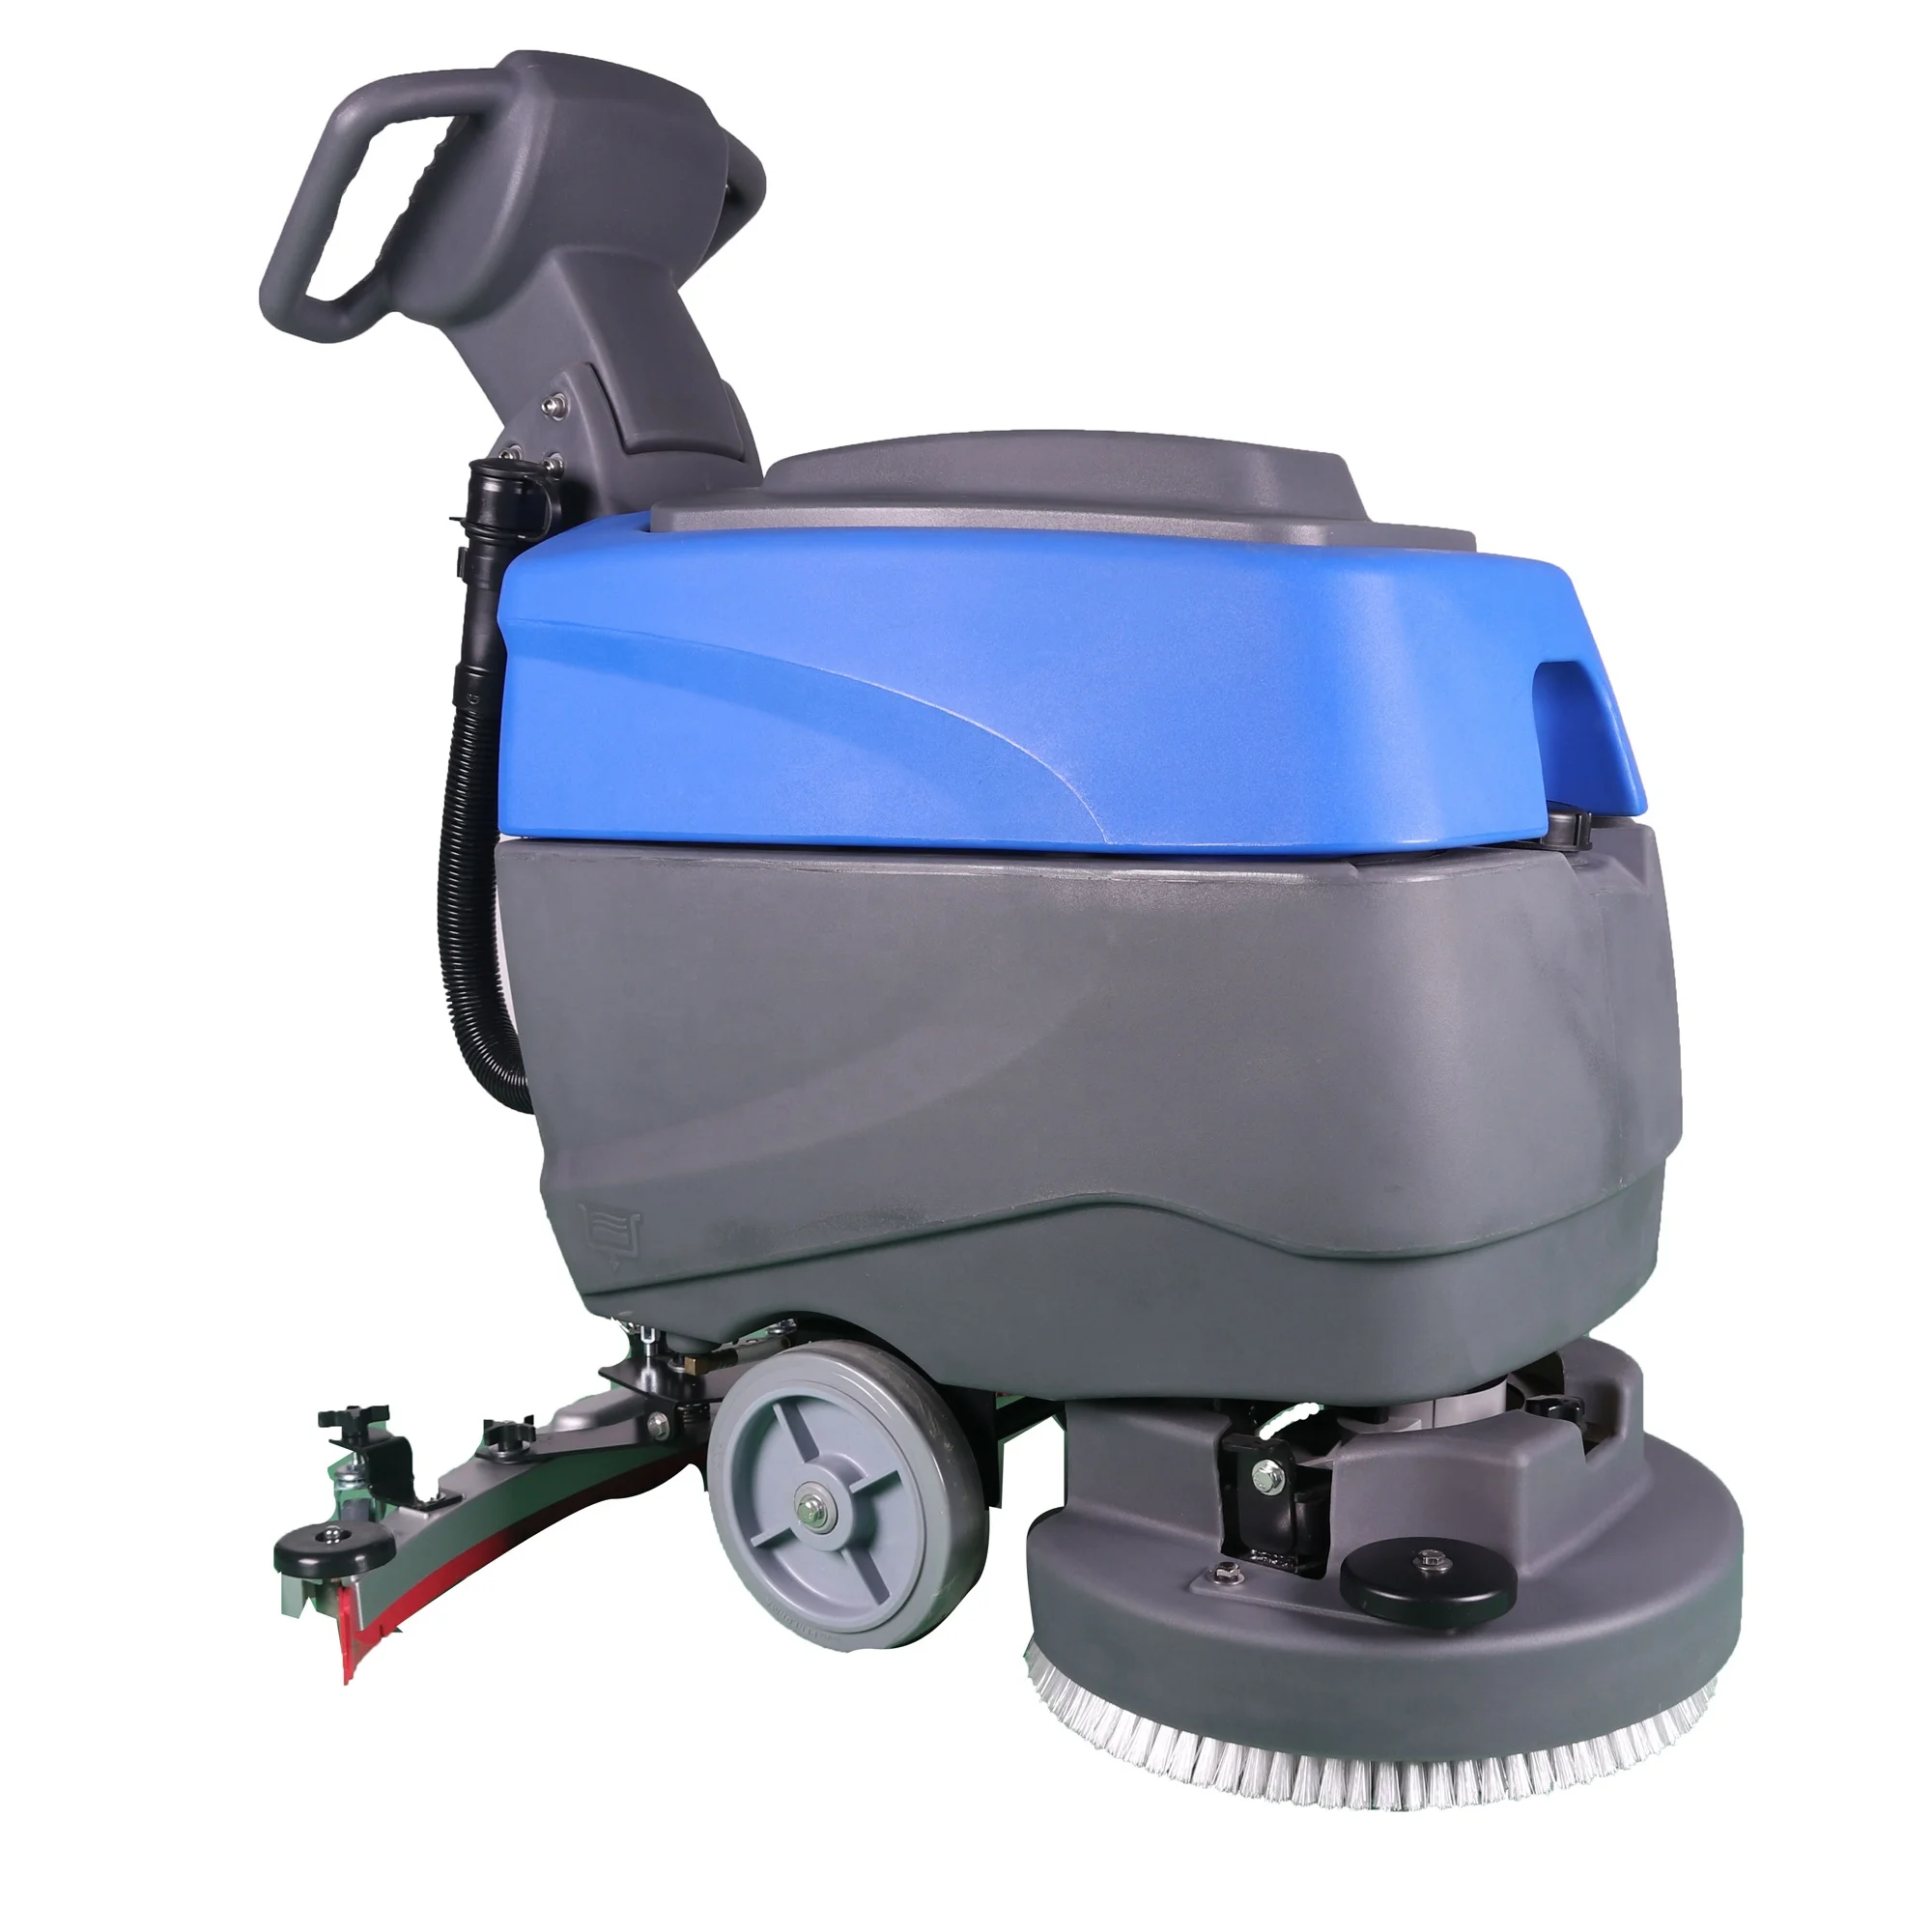 

C460S Industrial Walk Behind Concrete Floor Cleaning Scrubber Machine For Sale